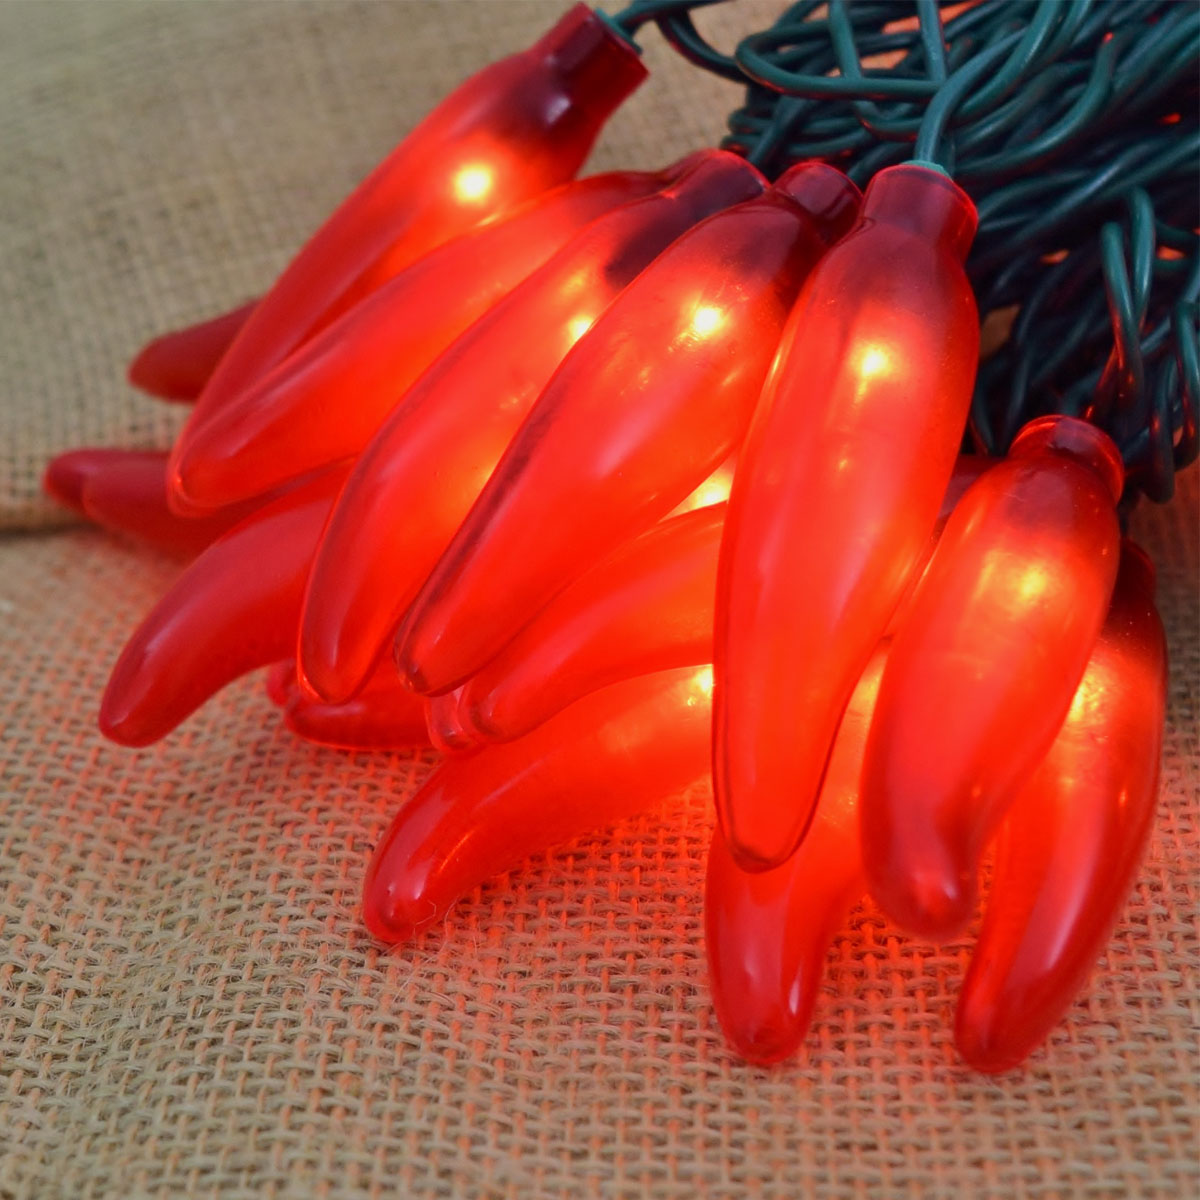 New 50-Count Multicolor Or Red Plug-In String Light Chili Pepper 